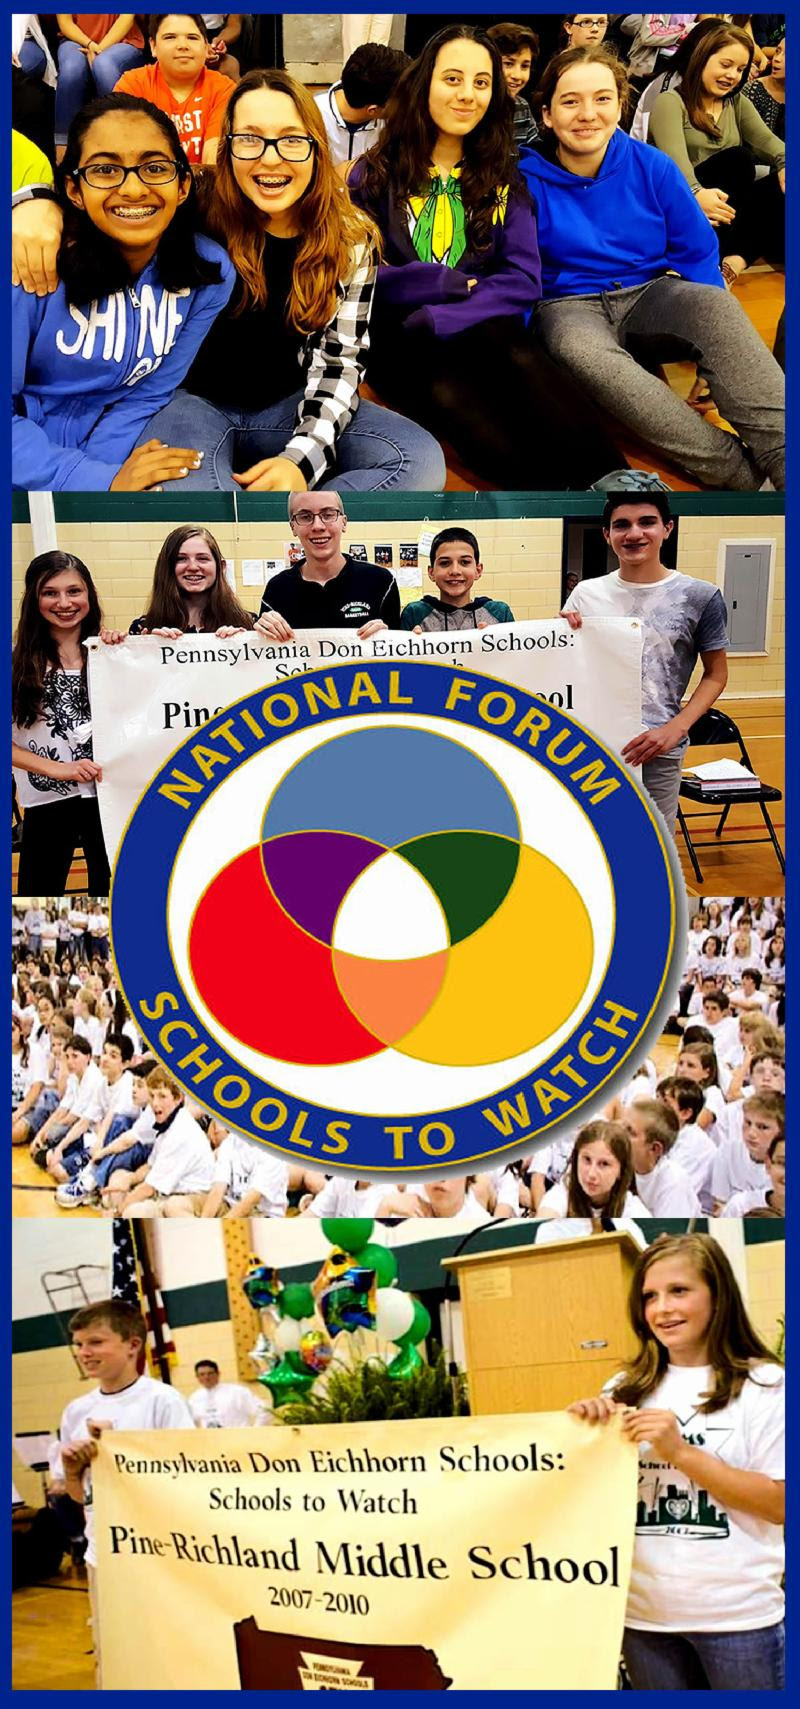 Previous Schools to Watch Recognition Programs at PRMS